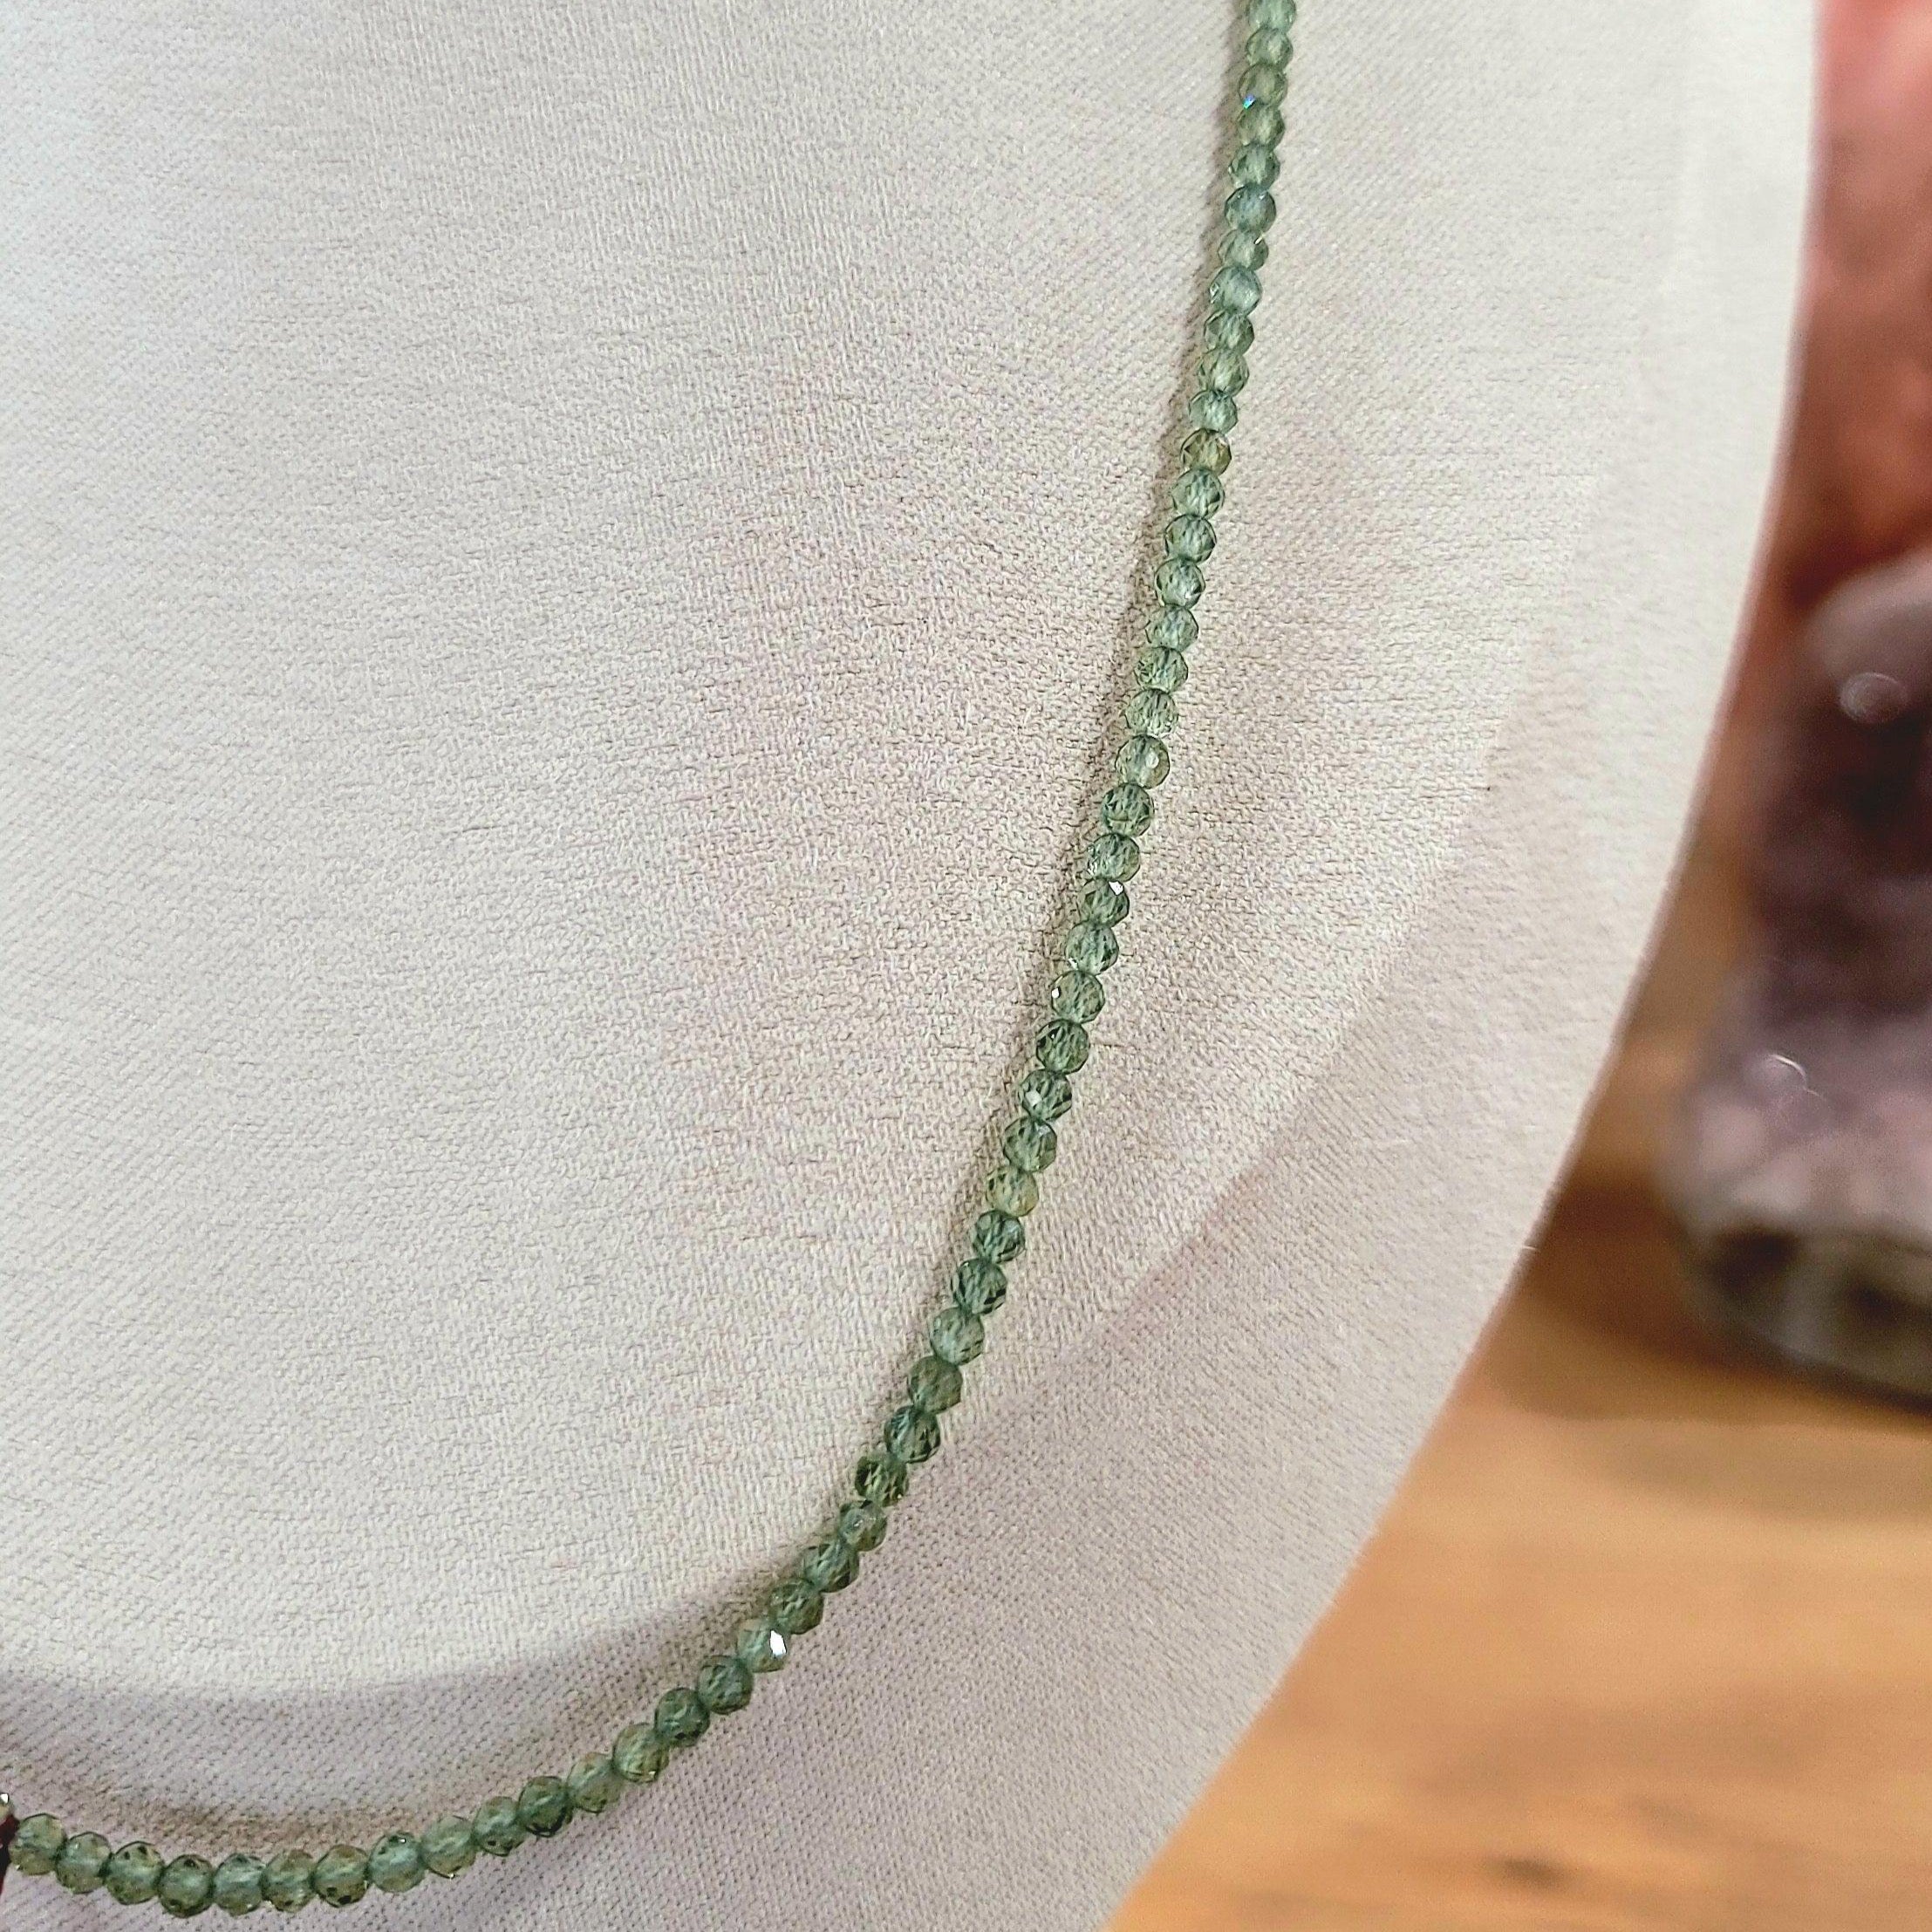 Green Apatite Micro Faceted Necklace for Emotional Balance, Logic and Stress Relief